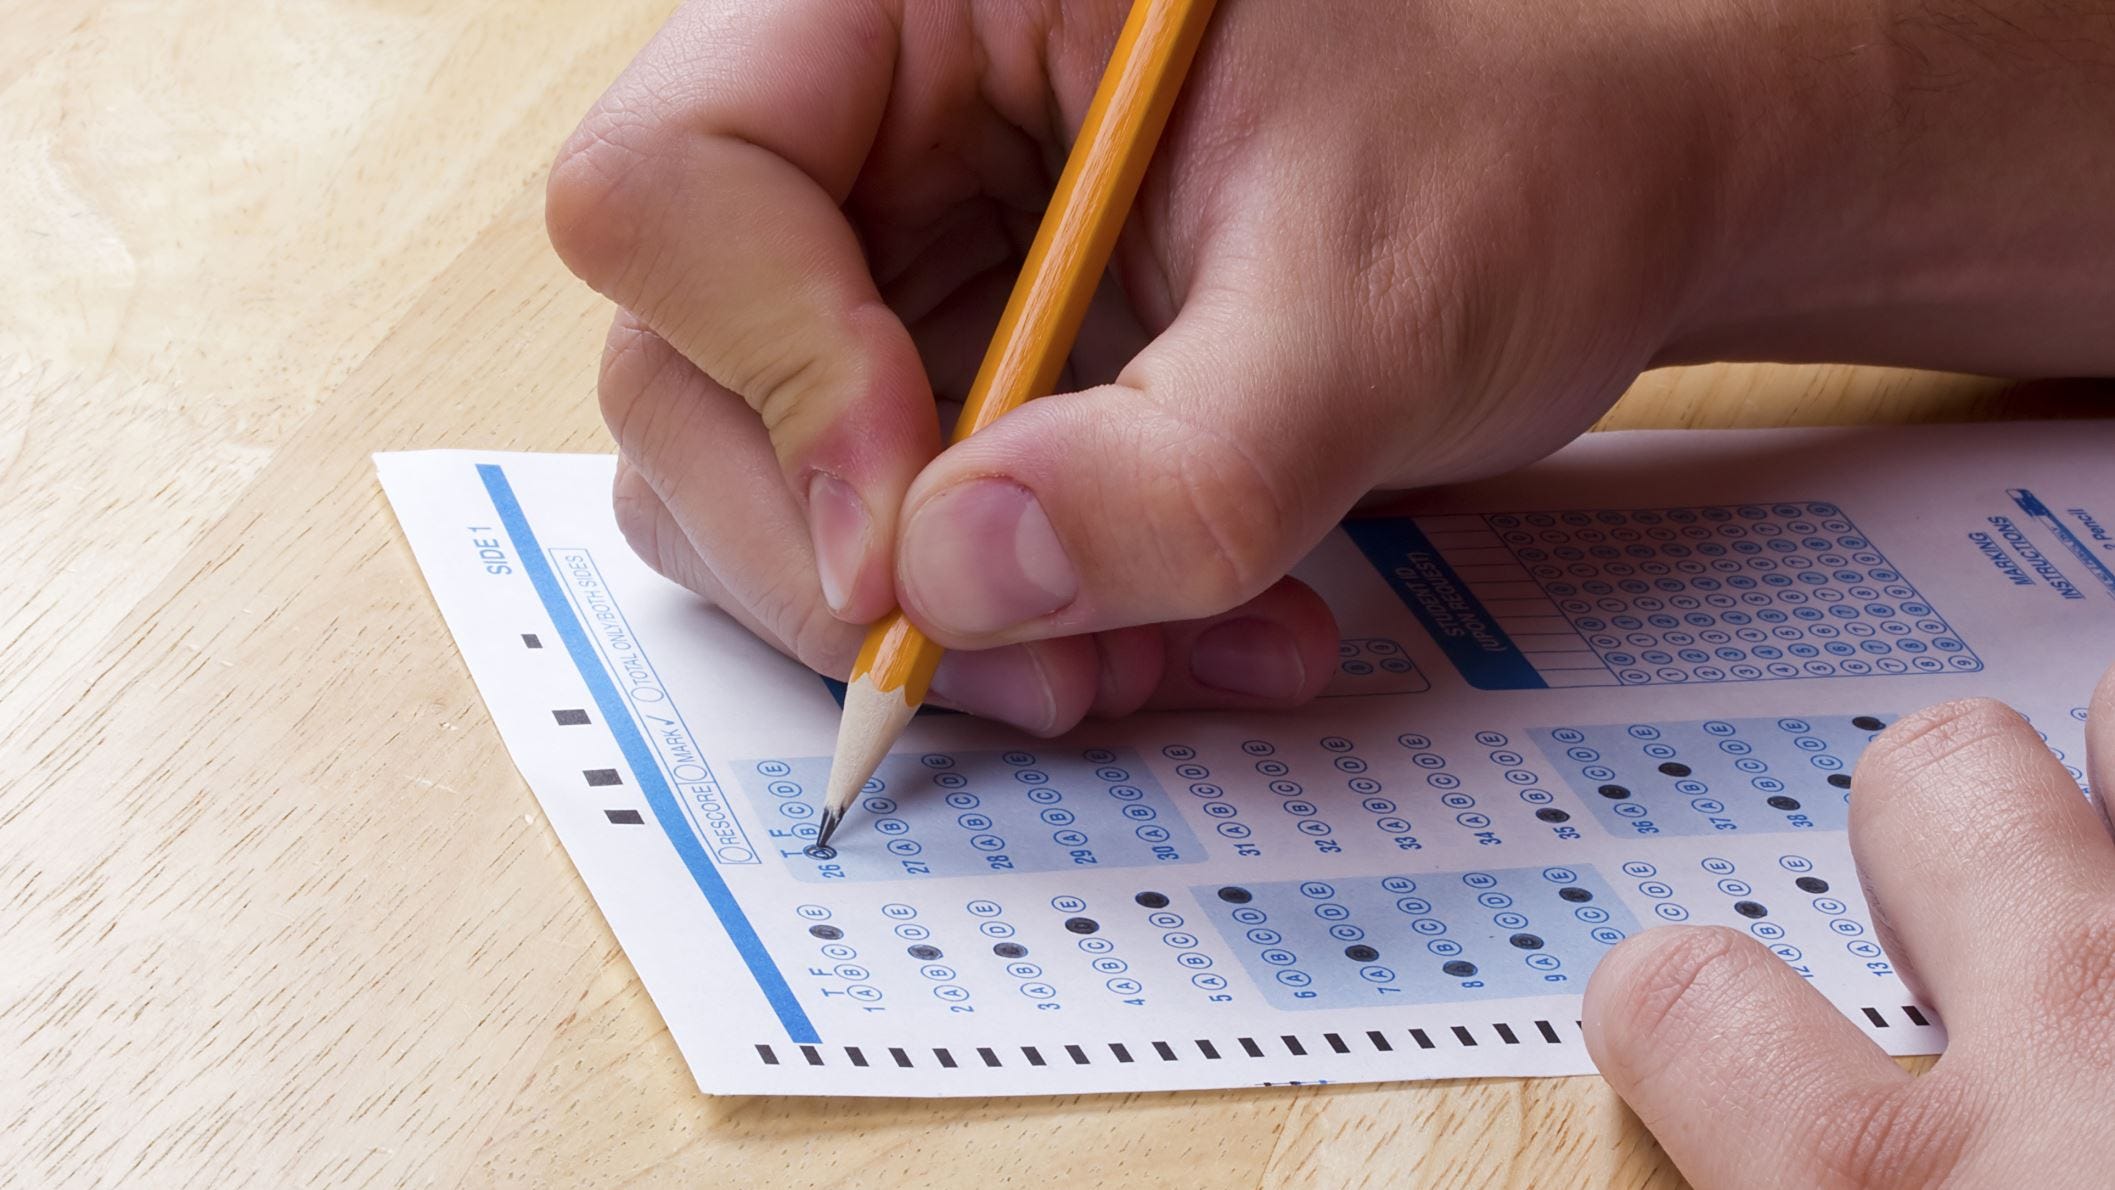 NJ releases NJSLA test scores. Check how your district performed